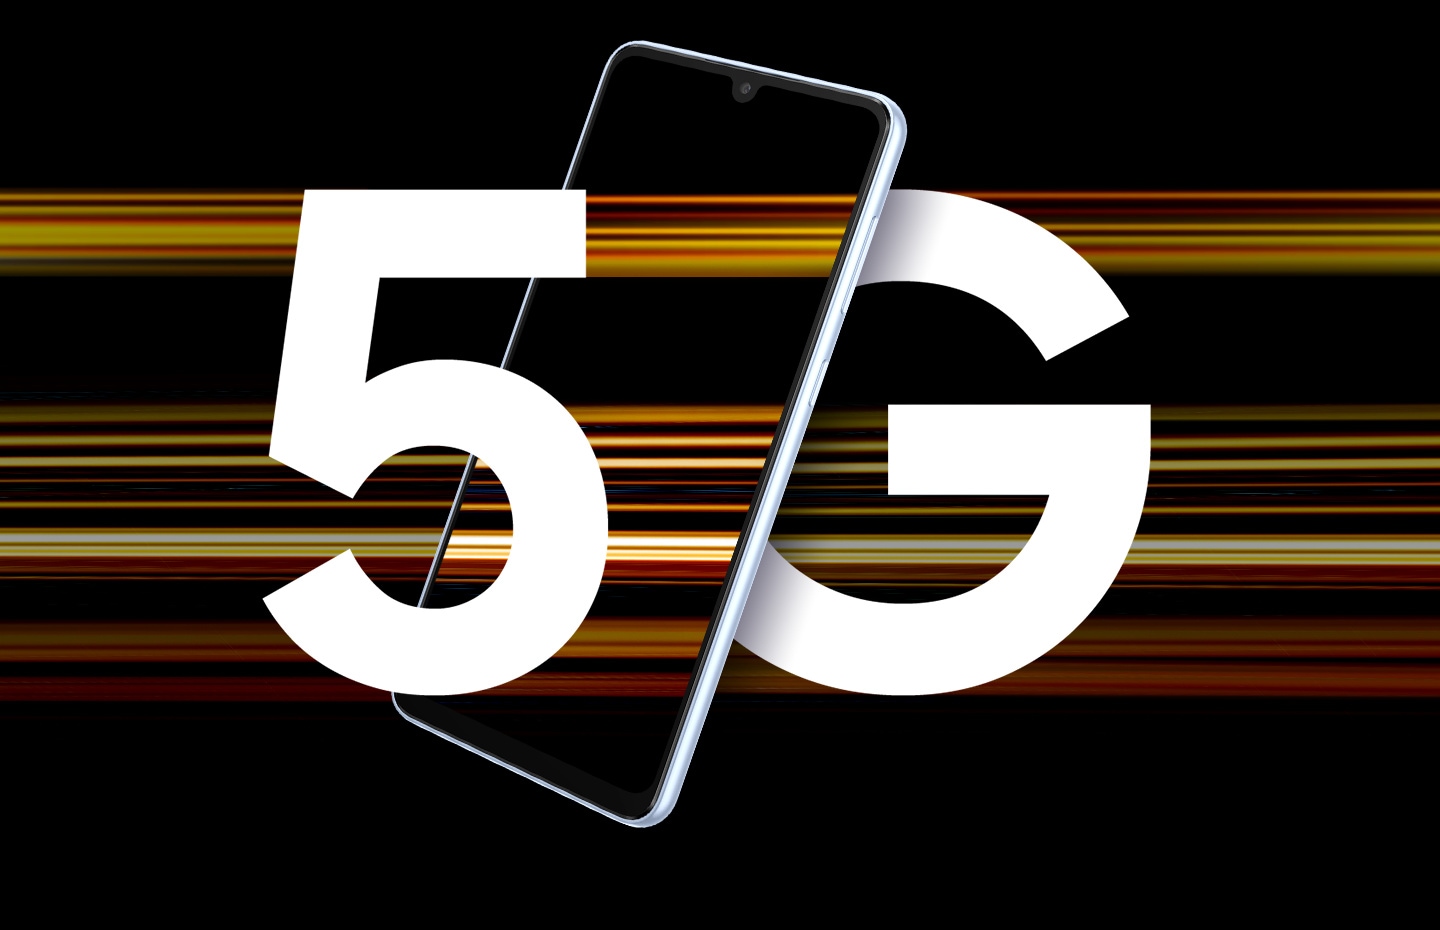 A Galaxy A33 5G device is shown with the text 5G divided at the letters by the device. Colorful streaks of light surround it to represent fast 5G speeds.